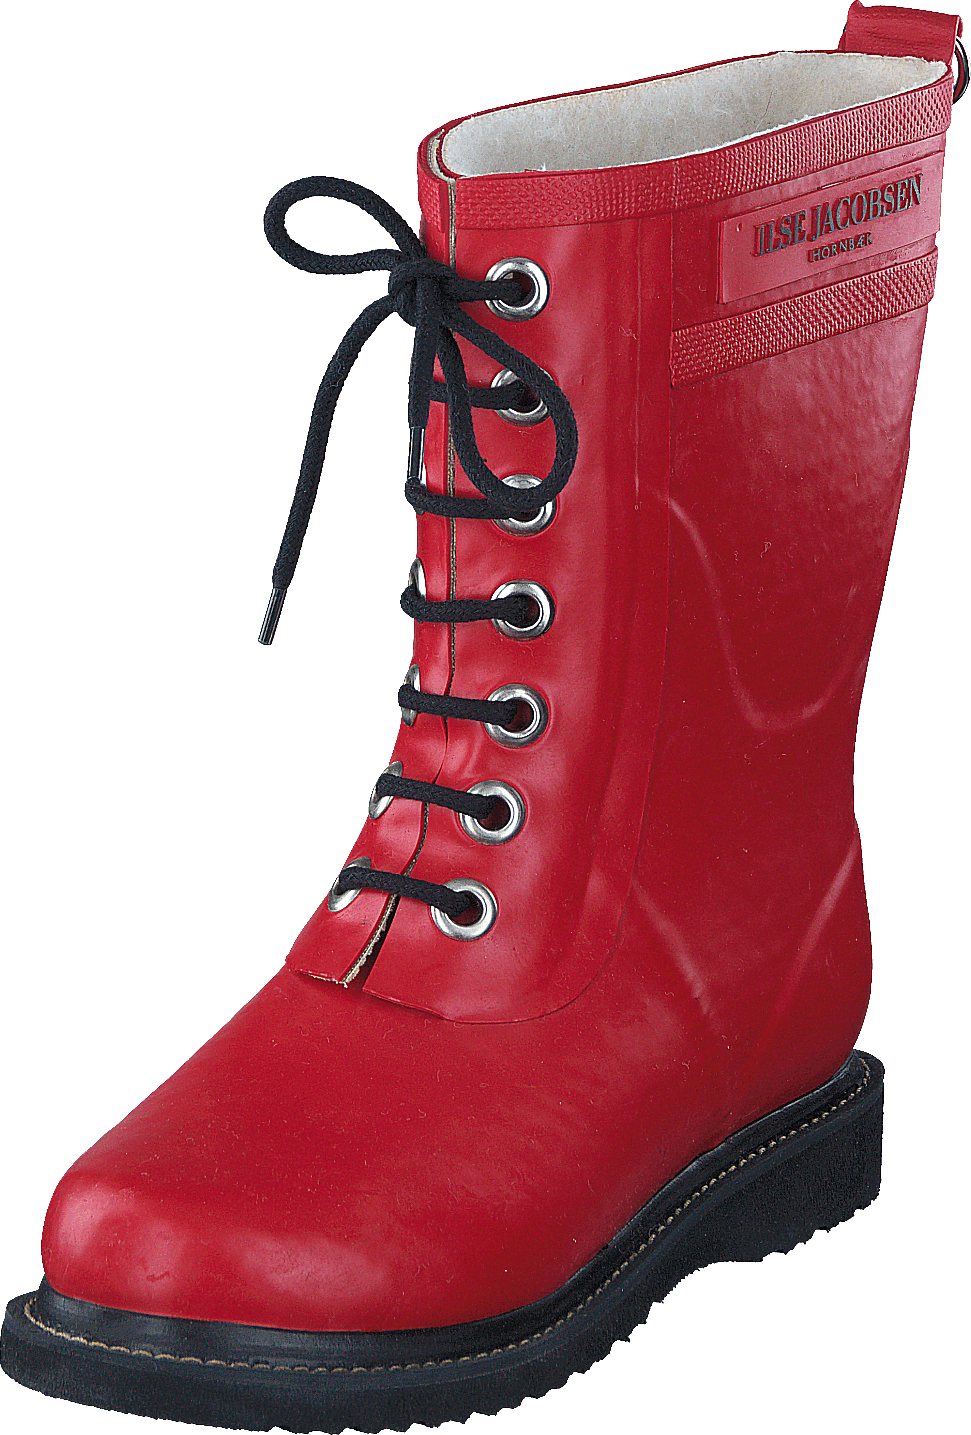 Kids Rubberboot Red